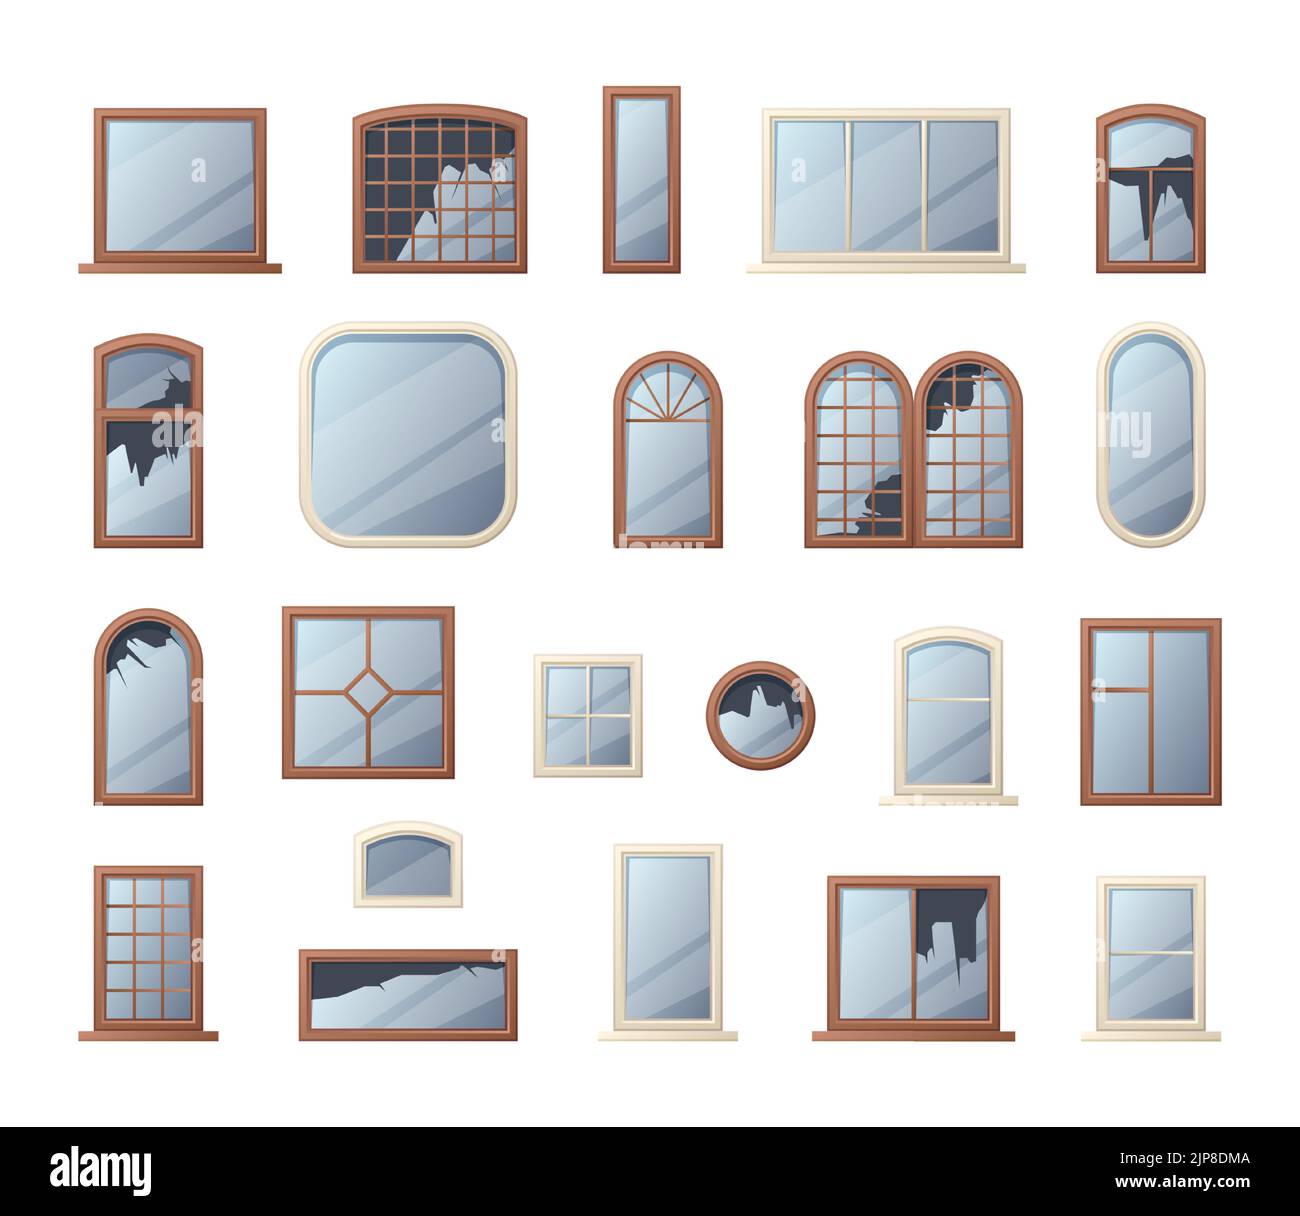 Broken windows. Shuttered glass in wooden and plastic frames, cracked home interior elements. Vector vandalism concept illustration. Cracked or damaged glass, abandoned building facade objects Stock Vector